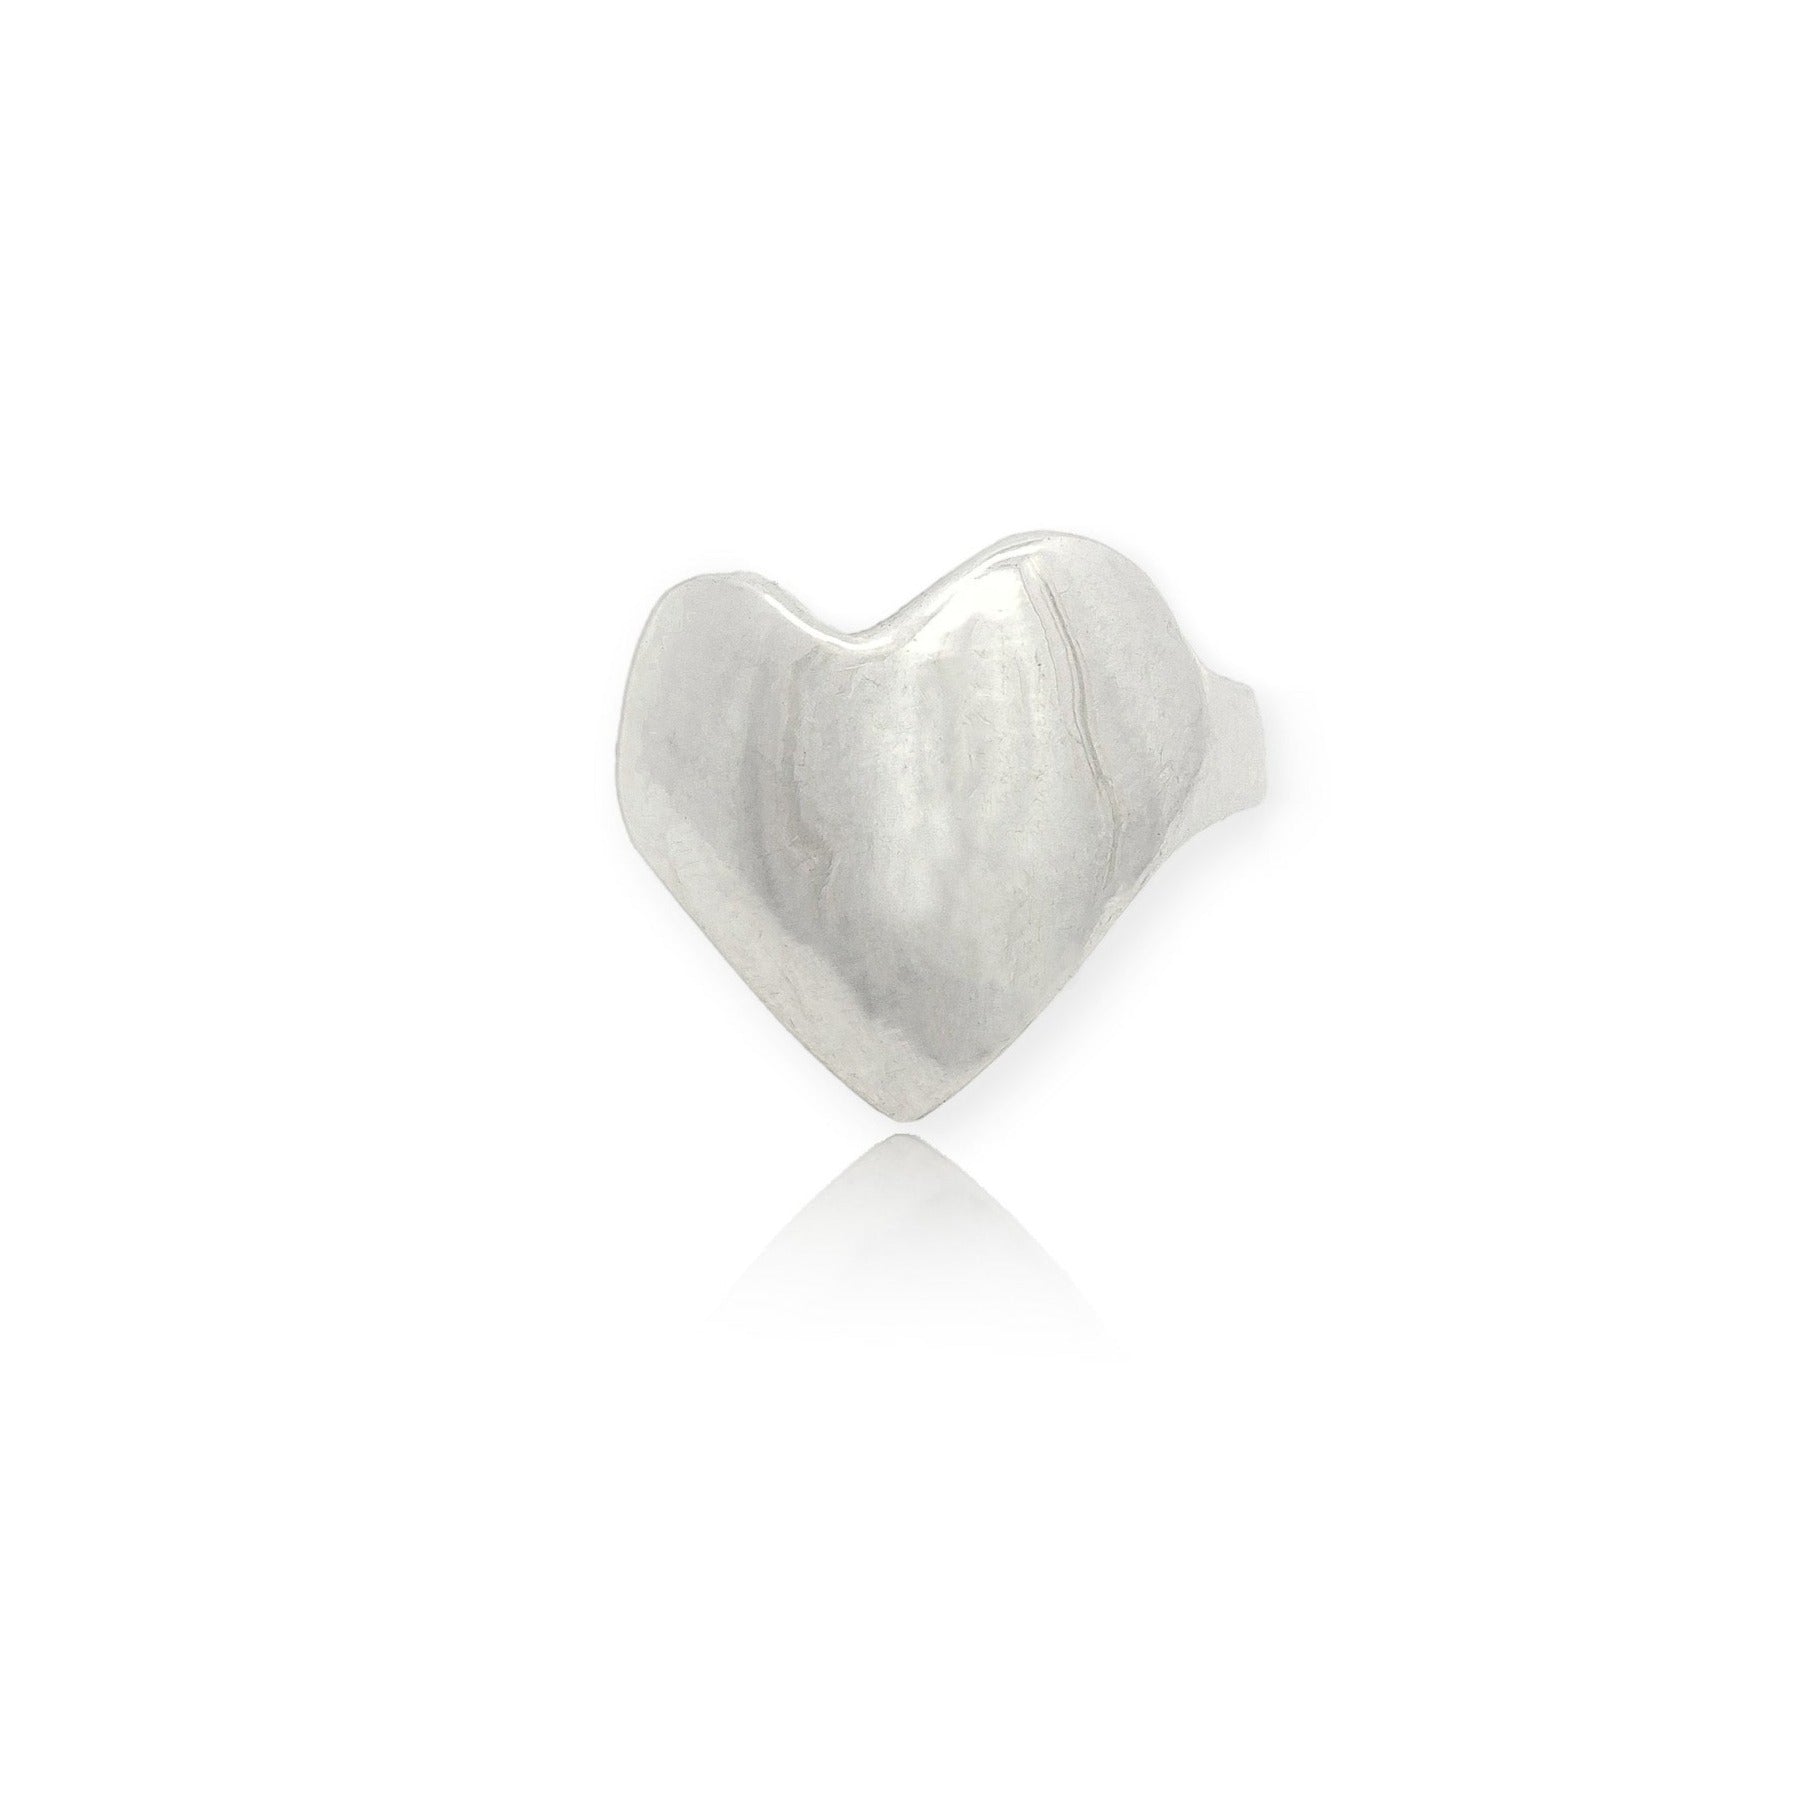 Crafted from an original wax sculpture, this chunky heart signet is named for the Greek god of love. Serves as a gentle reminder to love yourself. Cast in recycled brass or sterling silver for a luxurious finish. Designed & handmade in Los Angeles.